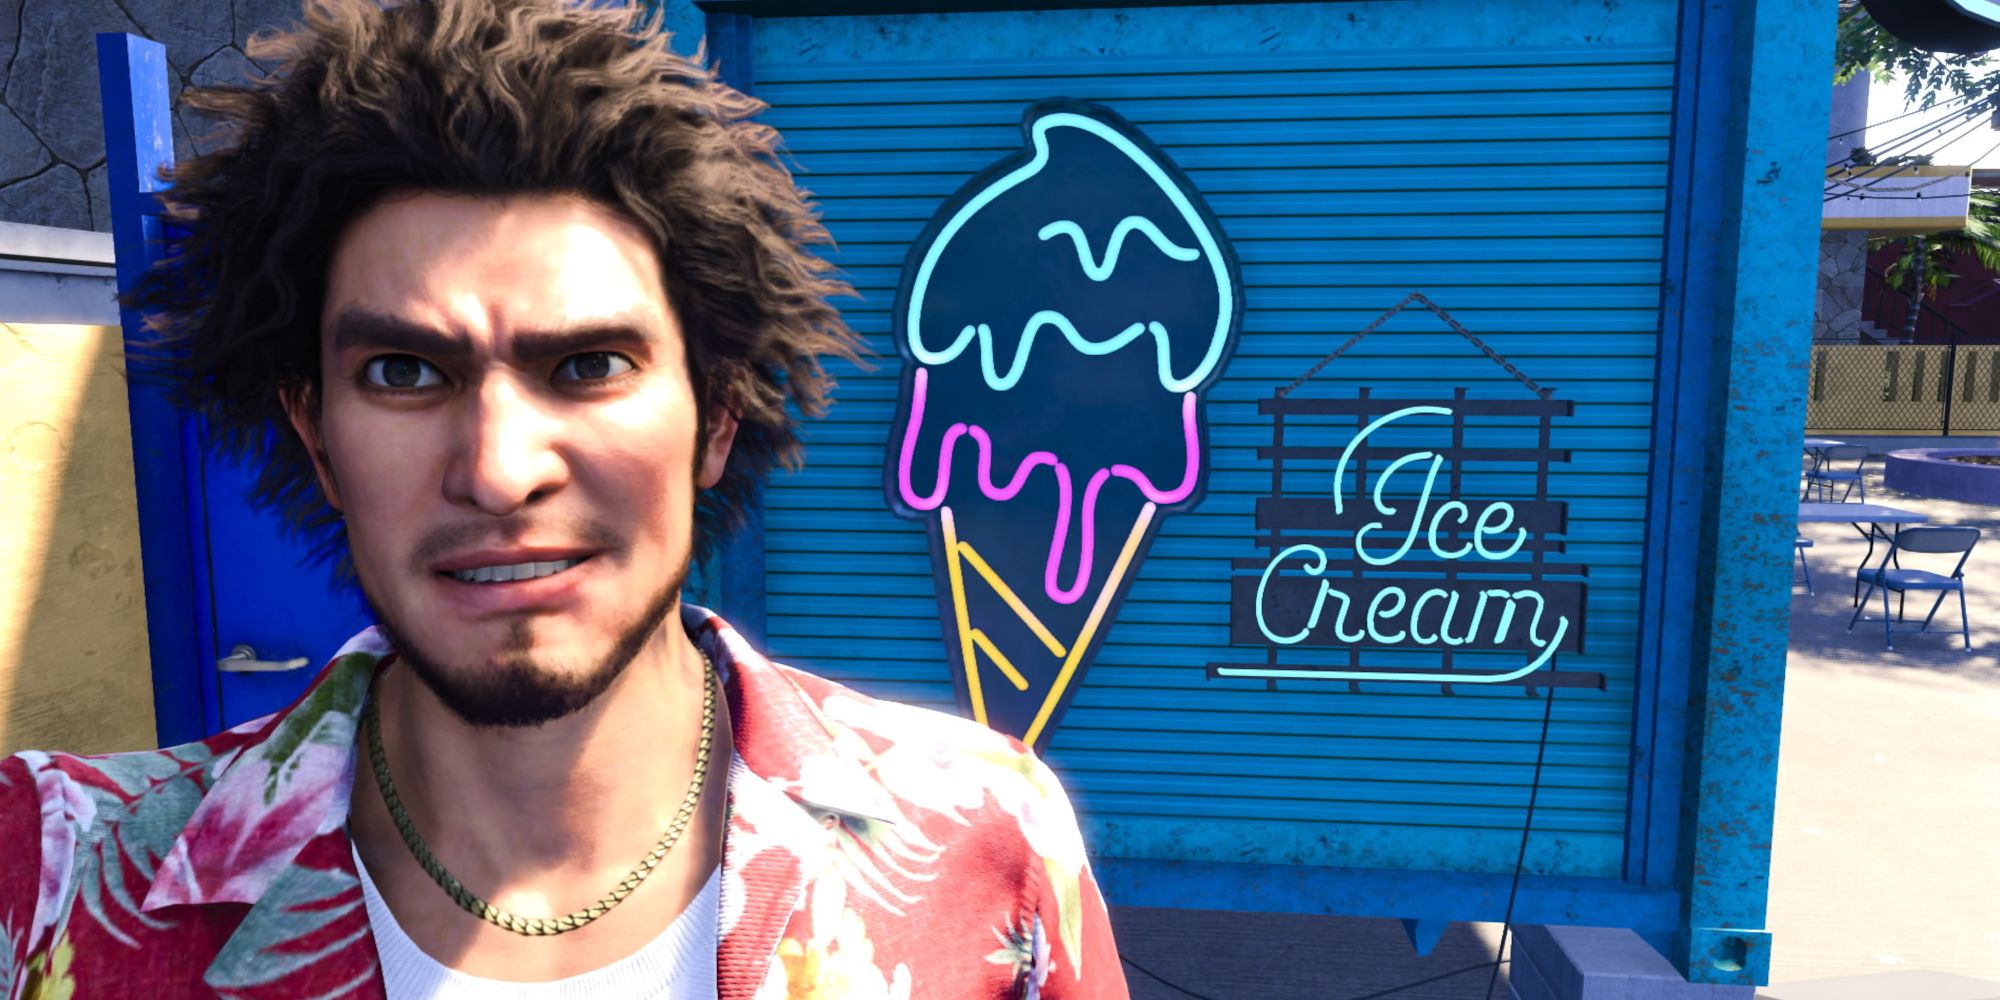 Like A Dragon Infinite Wealth, Ichiban taking a selfie with an ice cream sign